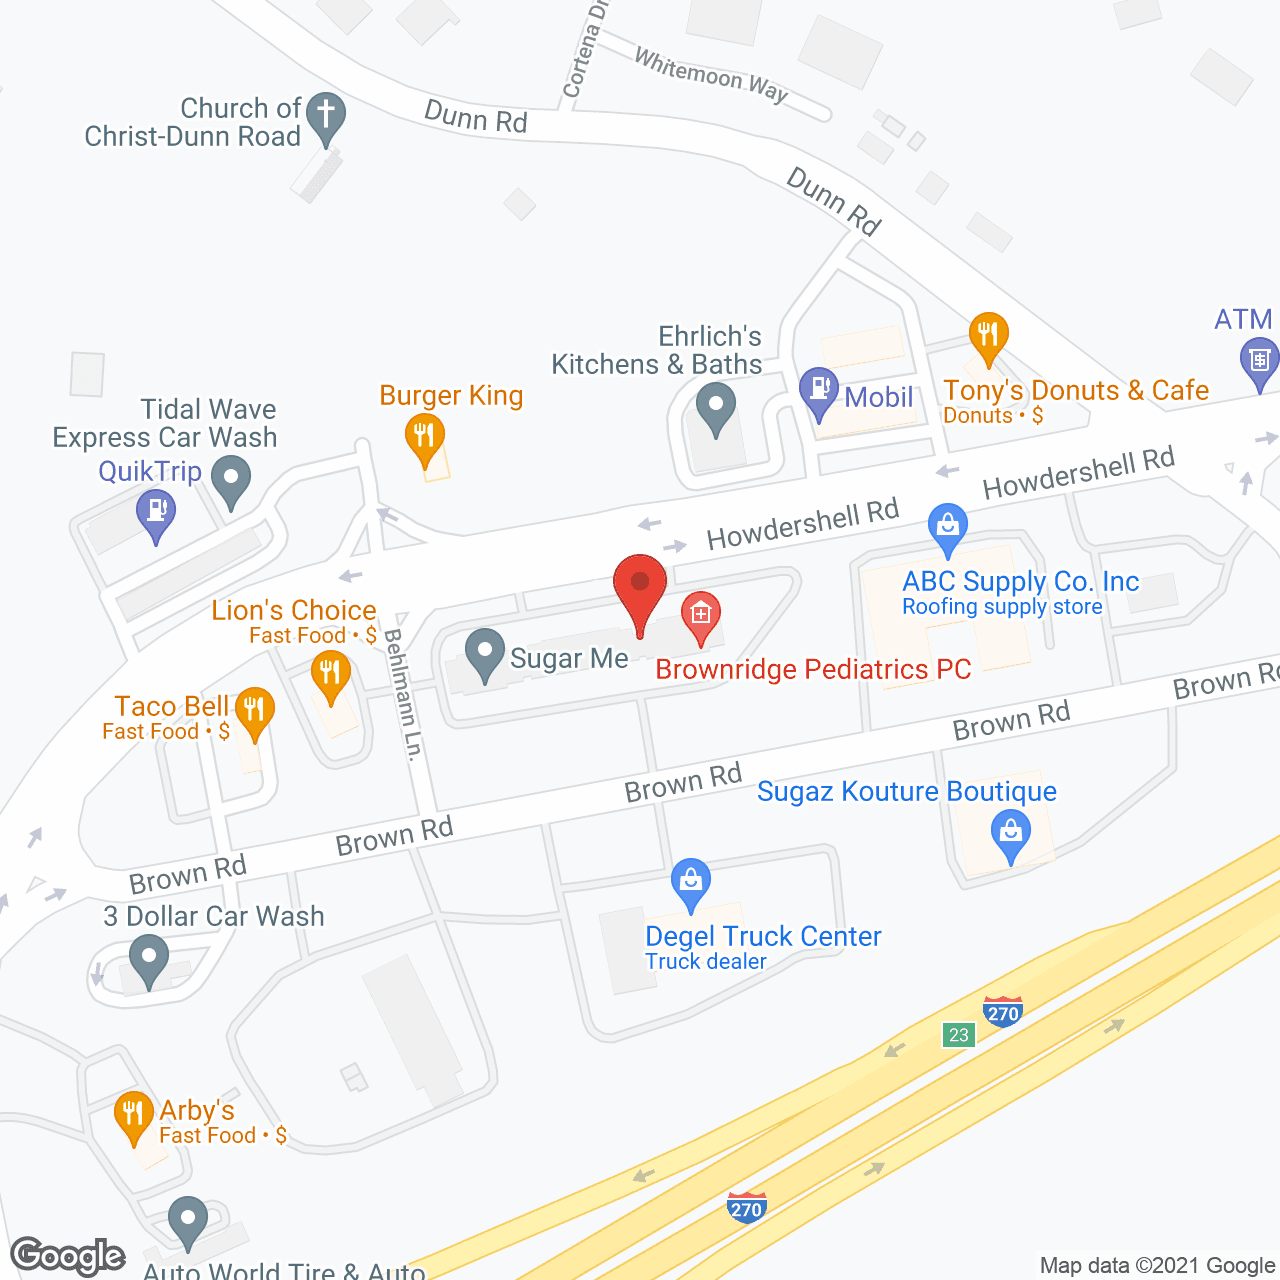 Comforcare in google map